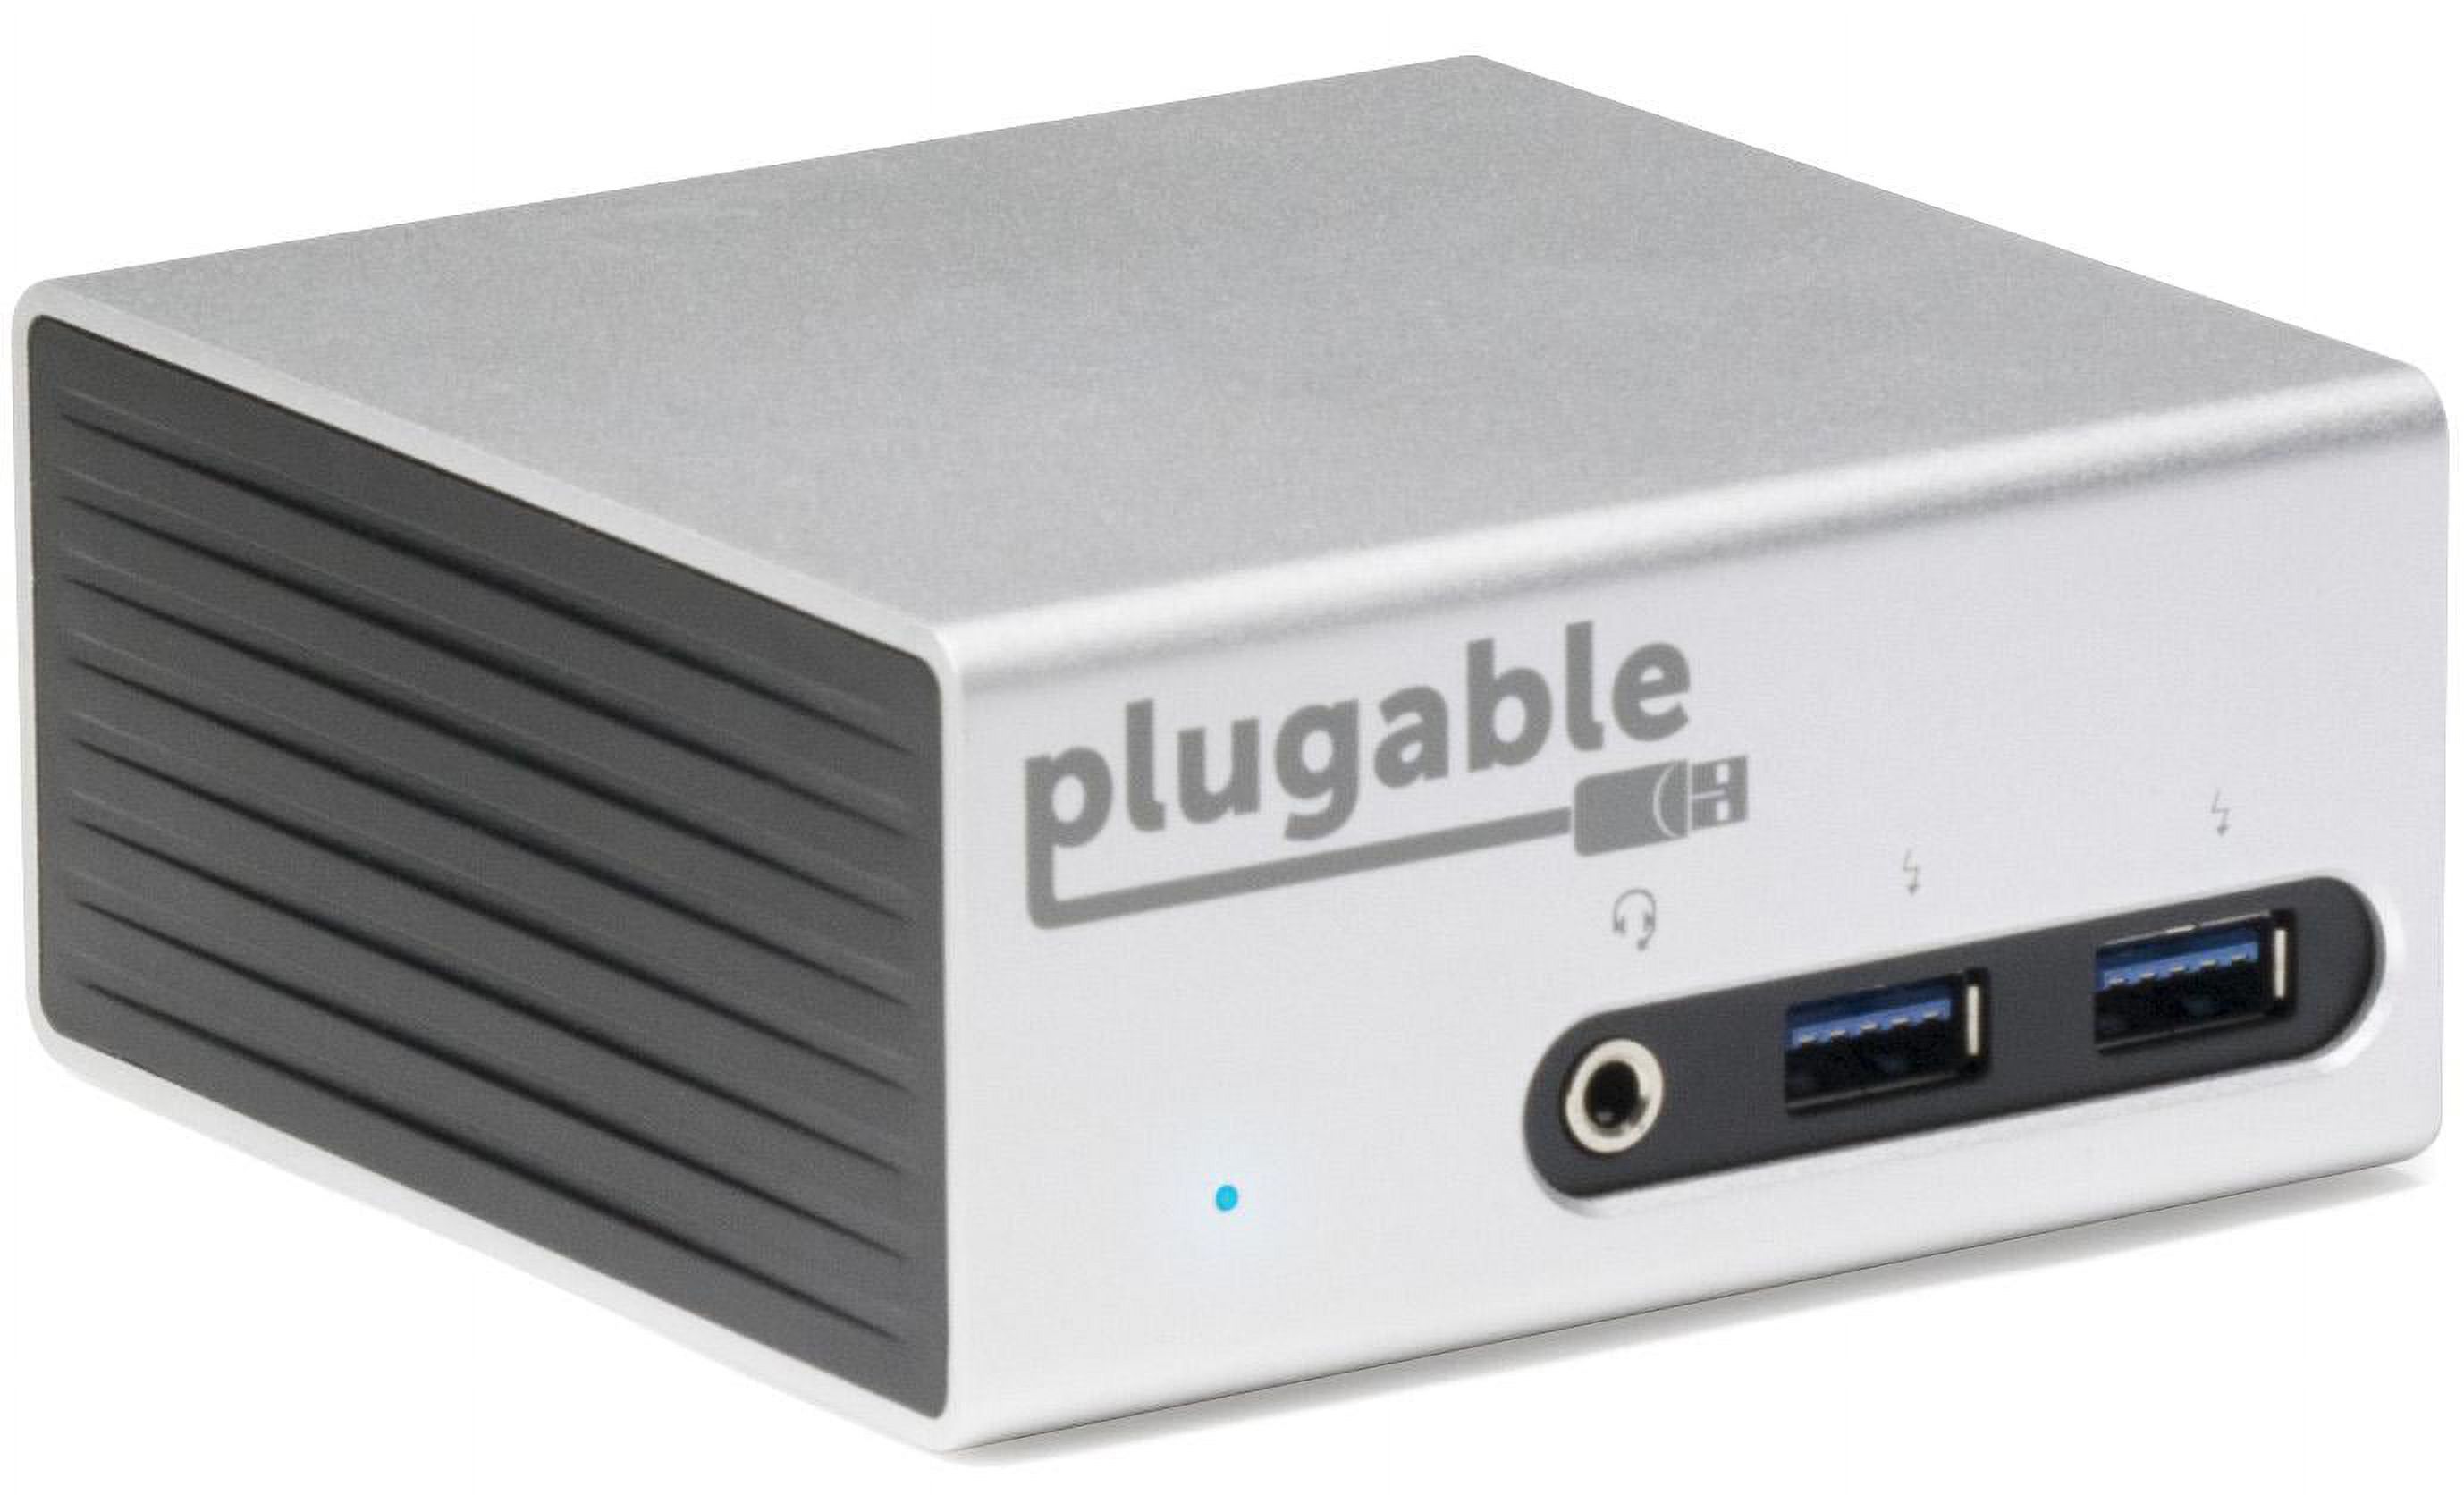 Plugable Universal USB 3.0 Docking Station with Dual Video Outputs and 4K Support for Windows 10, 8.1, 7 (HDMI and DVI or VGA, Gigabit Ethernet, Audio, 4 USB 3.0 Ports, VESA Mount Aluminum Mini) - image 1 of 7